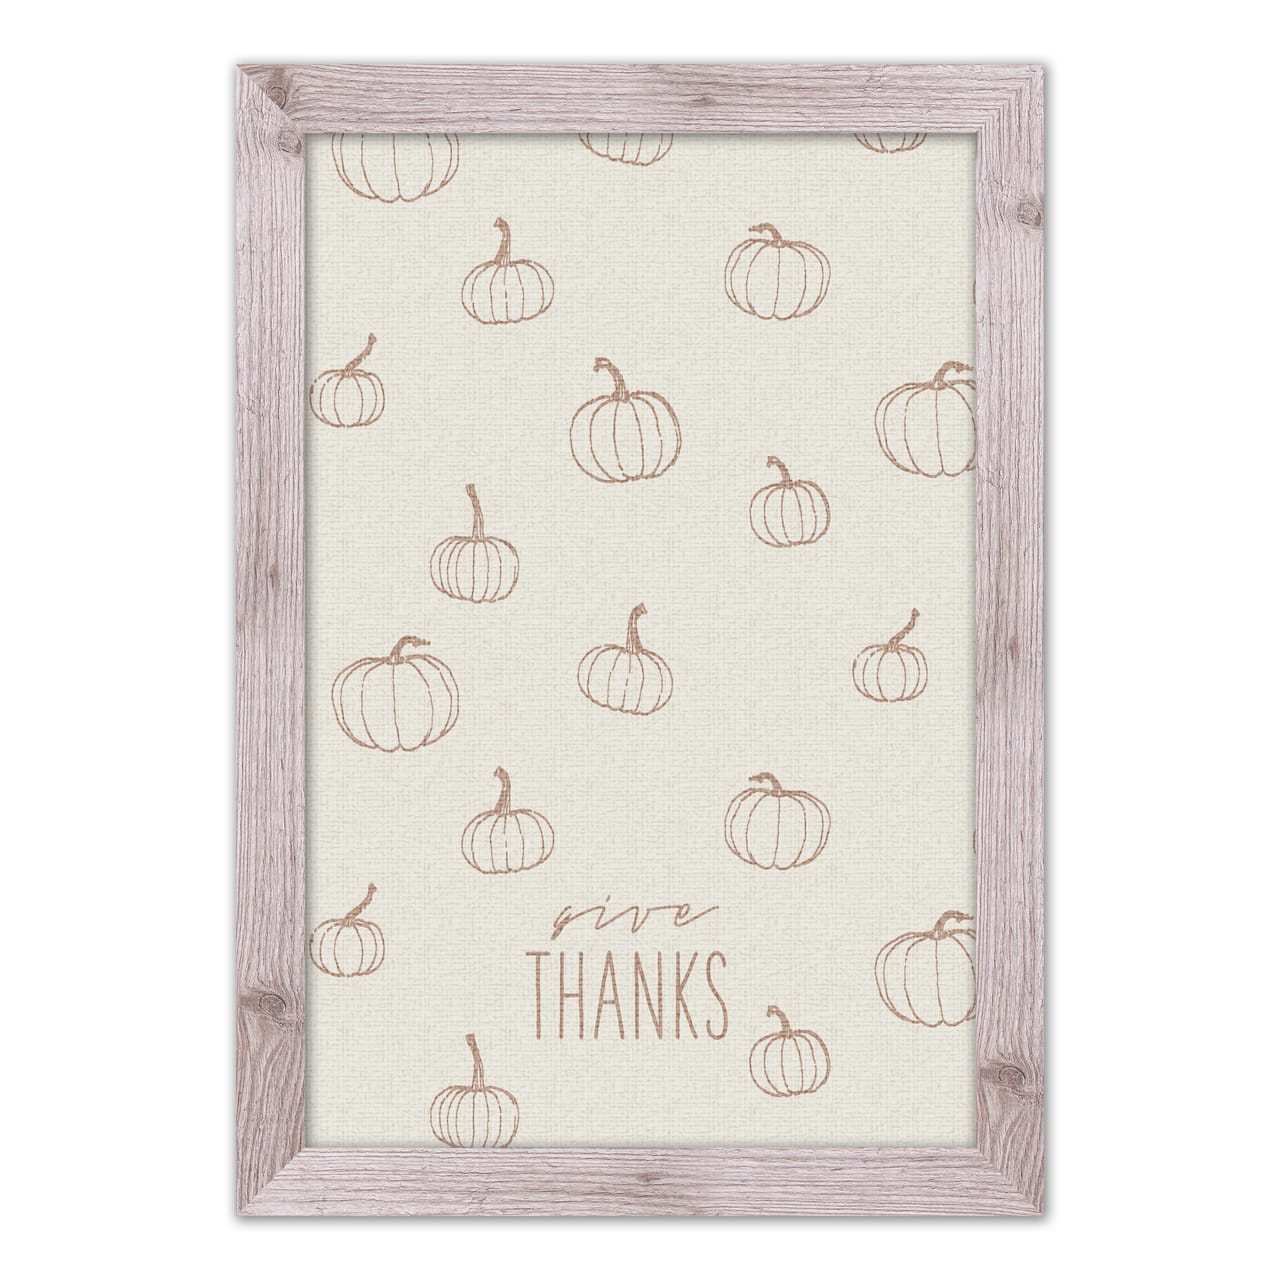 Dusty Rose Pumpkin Give Thanks Print in Western White Frame